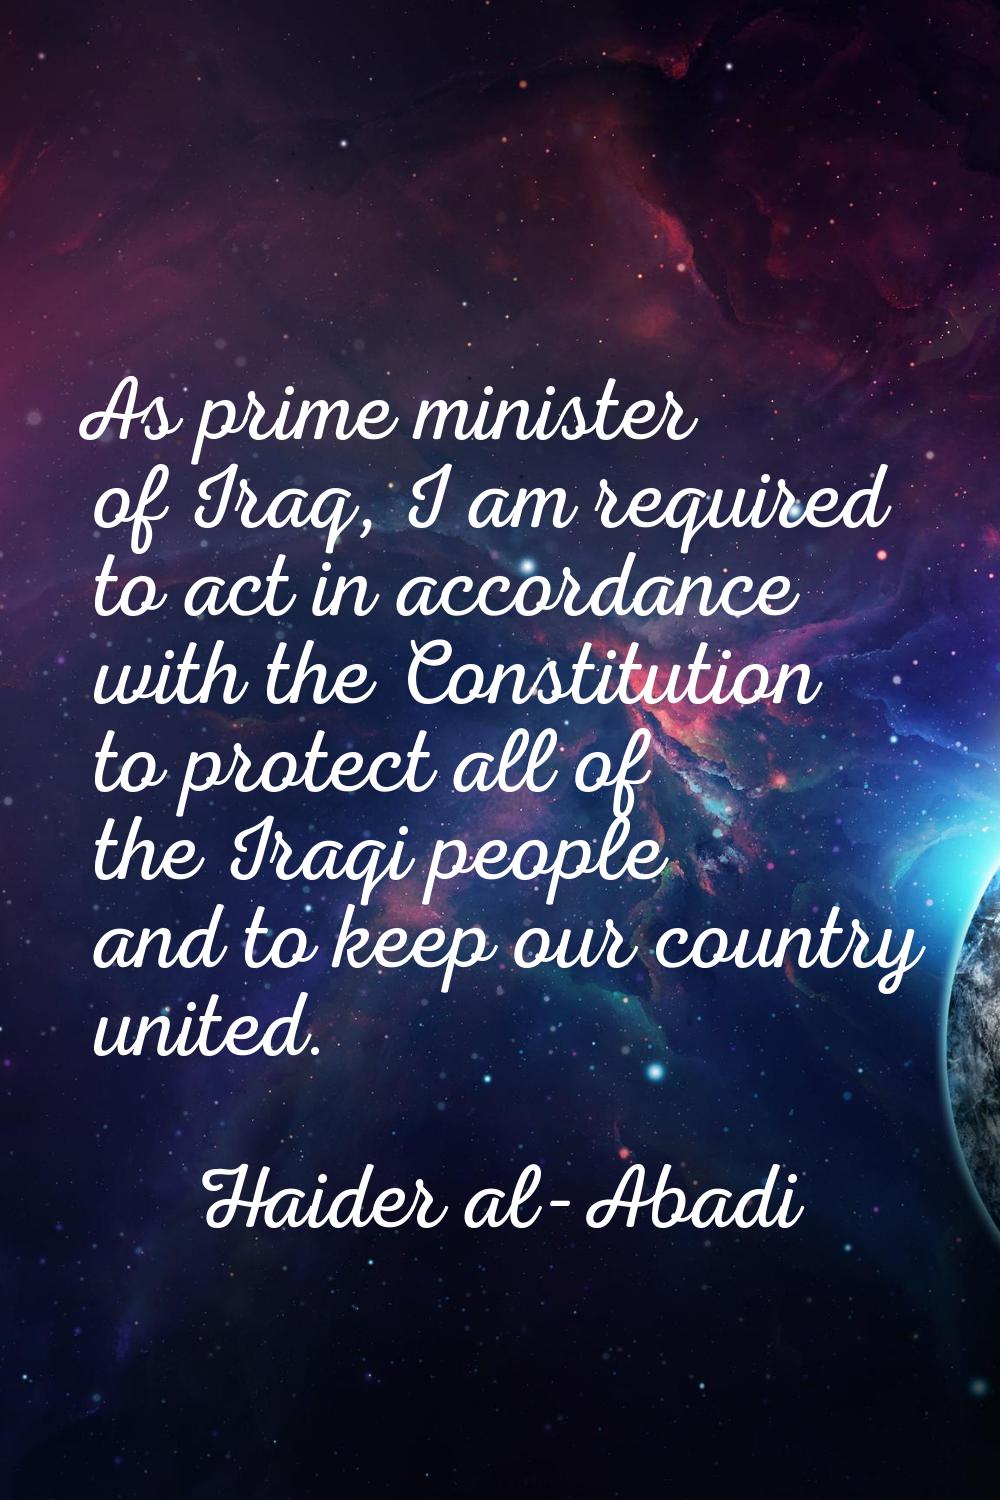 As prime minister of Iraq, I am required to act in accordance with the Constitution to protect all 